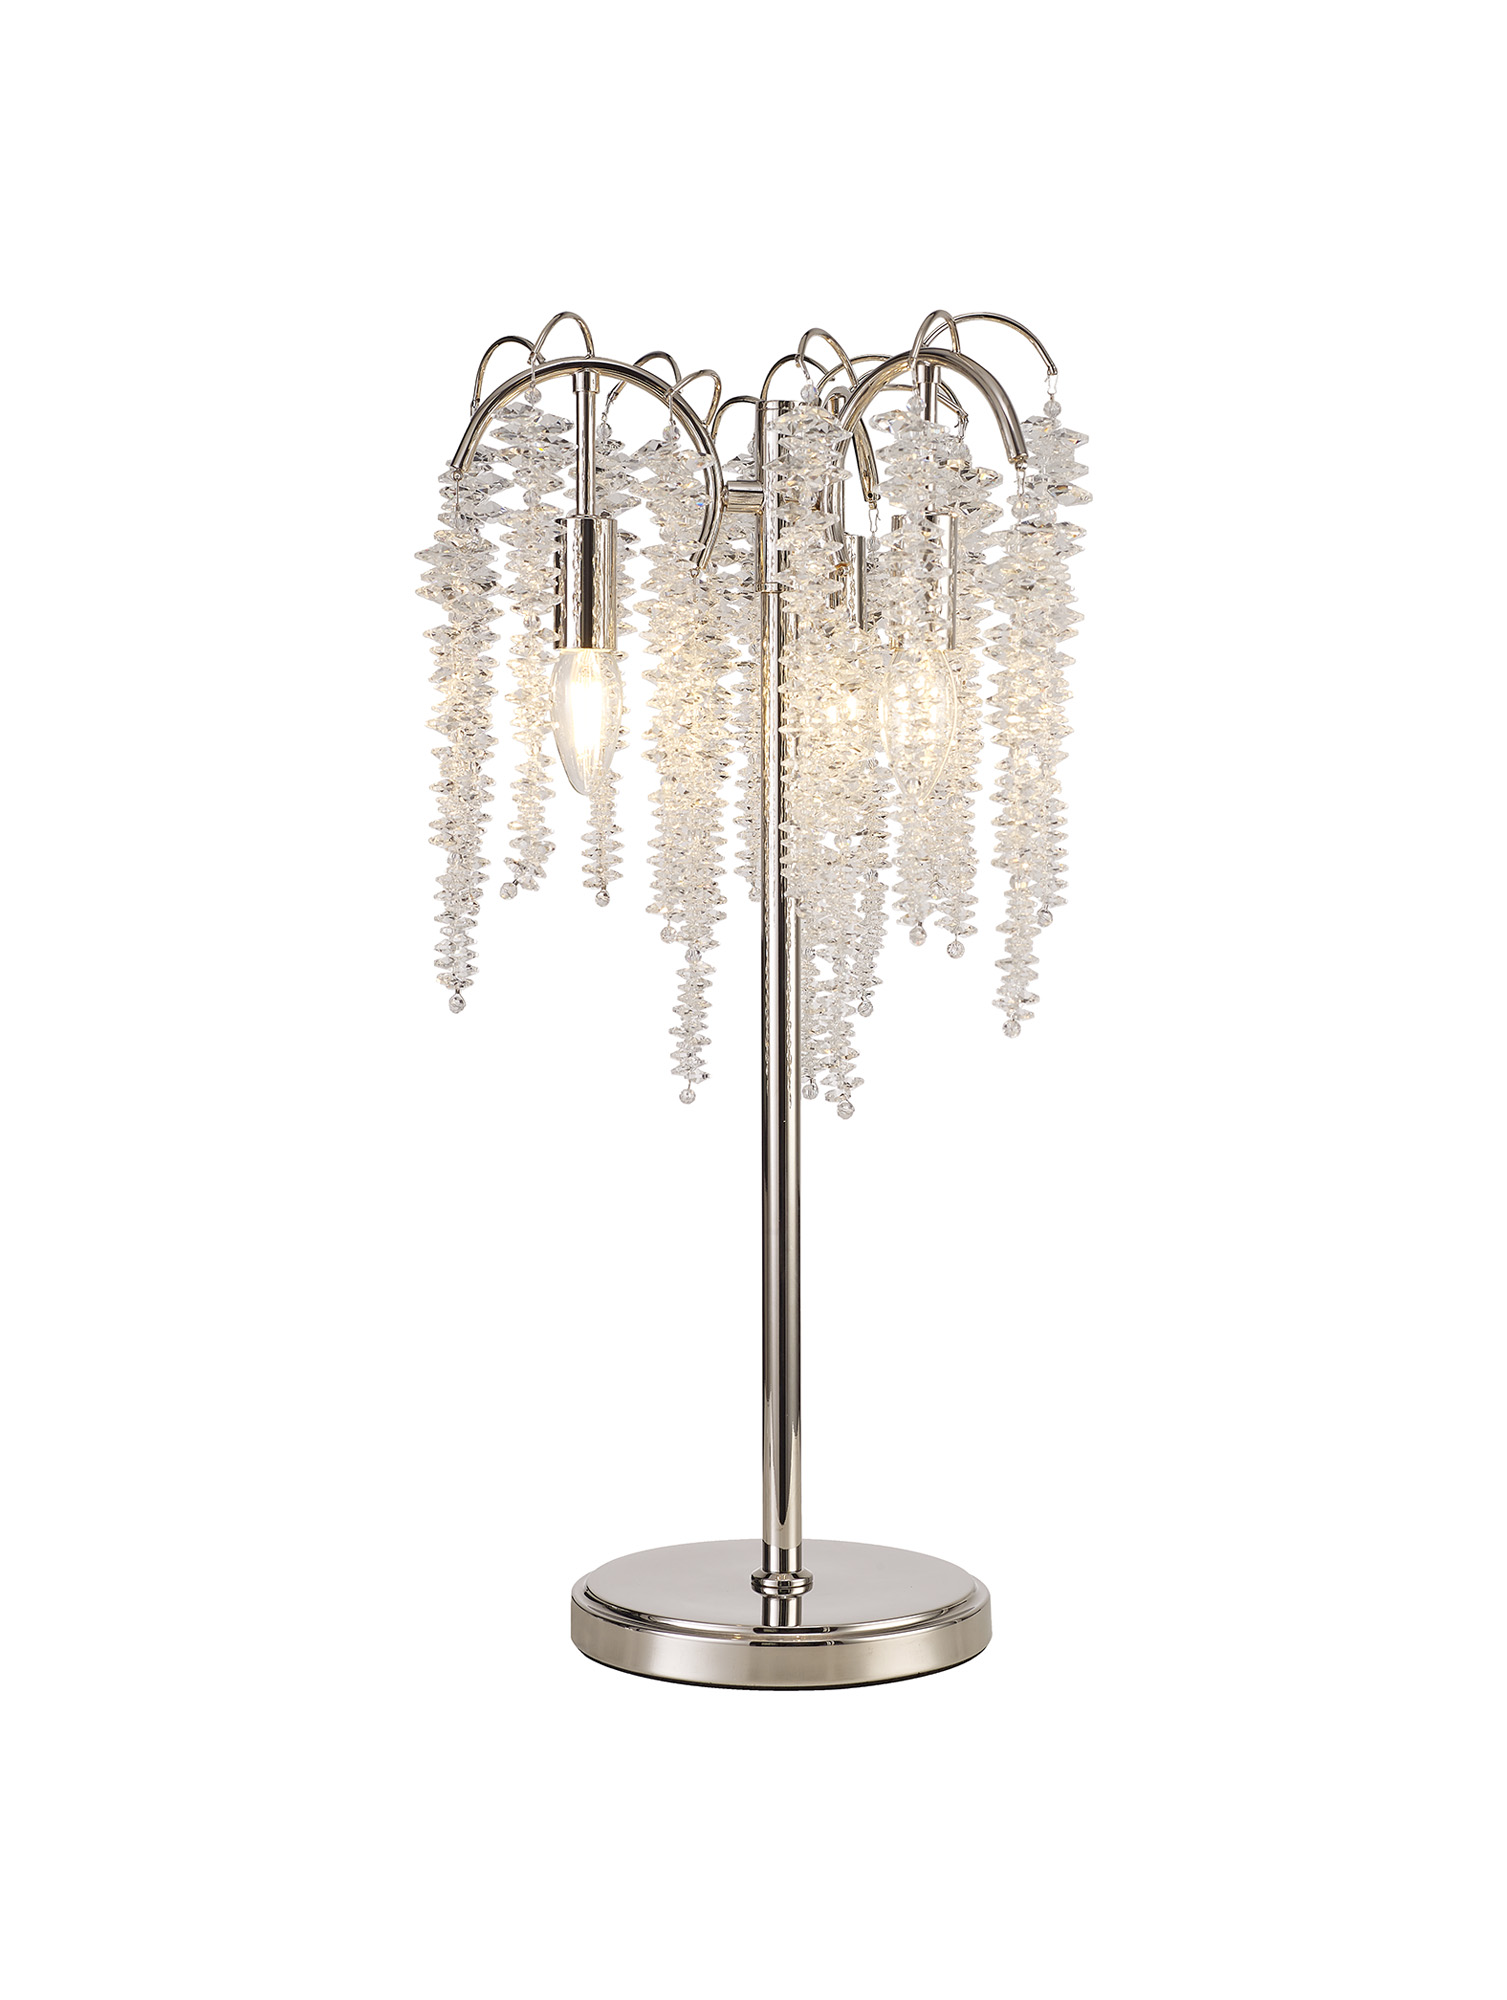 IL32904  Wisteria 62cm Table Lamp 3 Light Polished Nickel